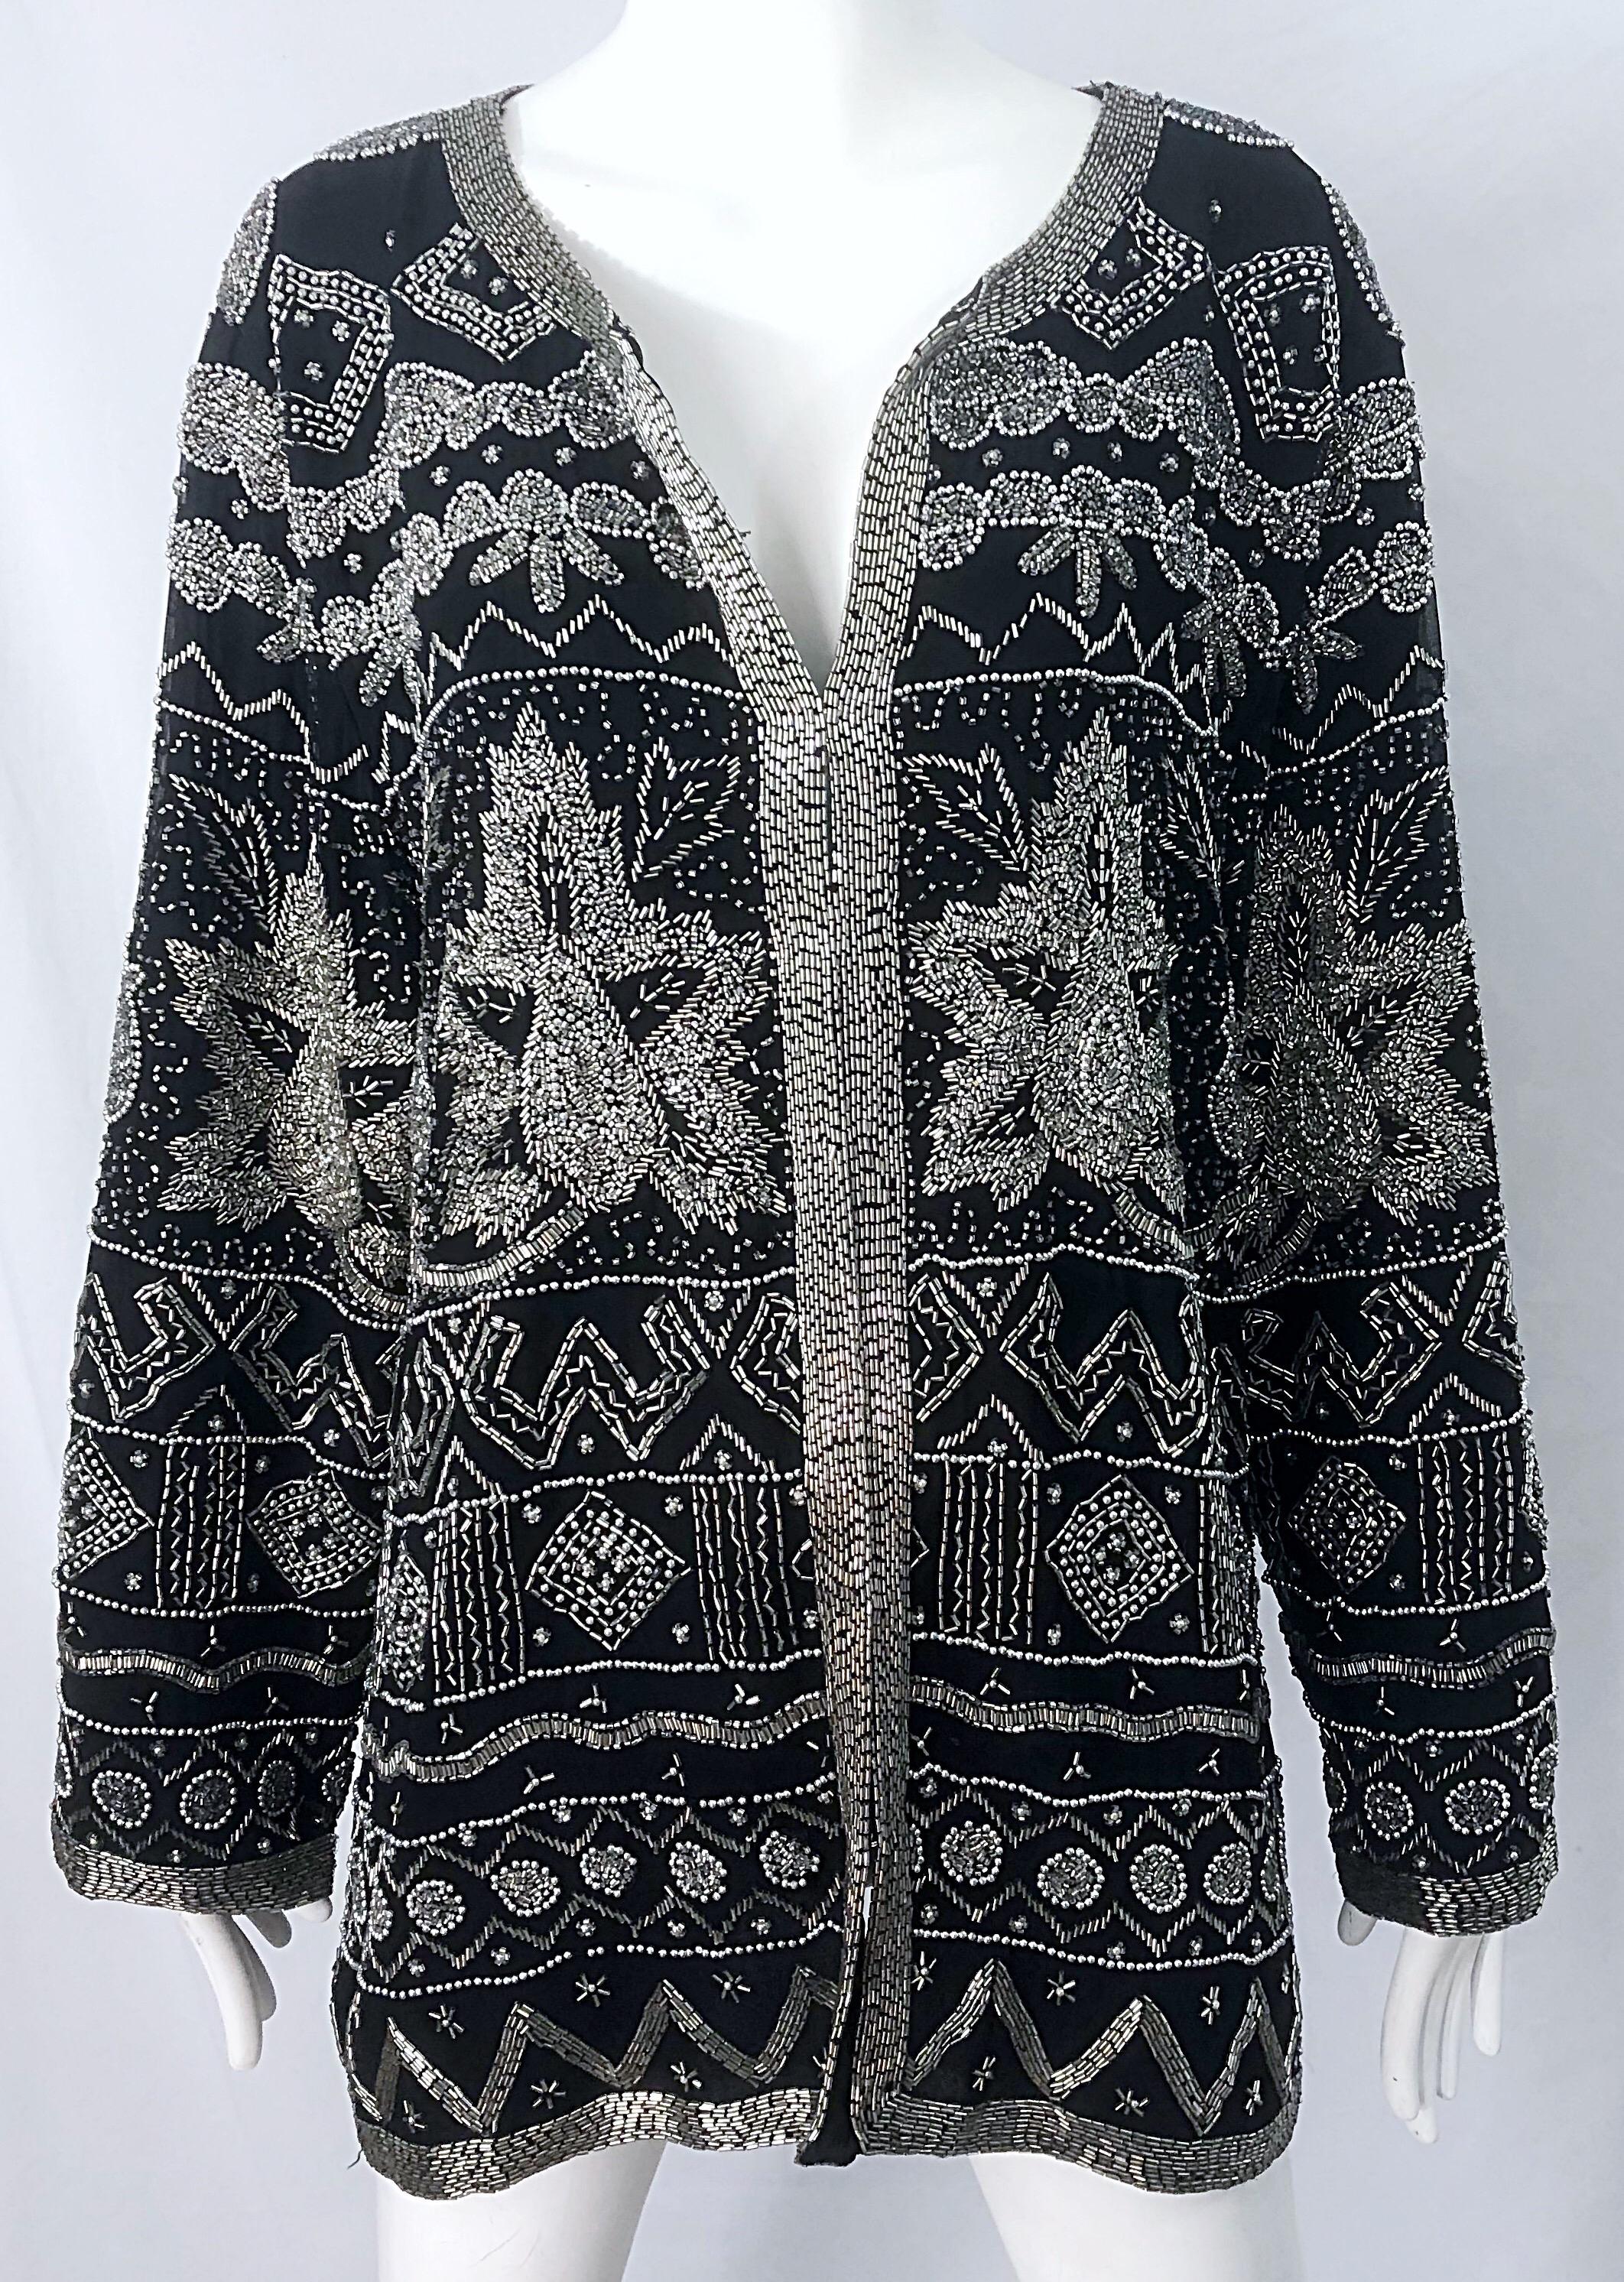 Intricate 1990s Heavily Beaded 3XL Black Silver Sequined Vintage 90s Jacket Top For Sale 1